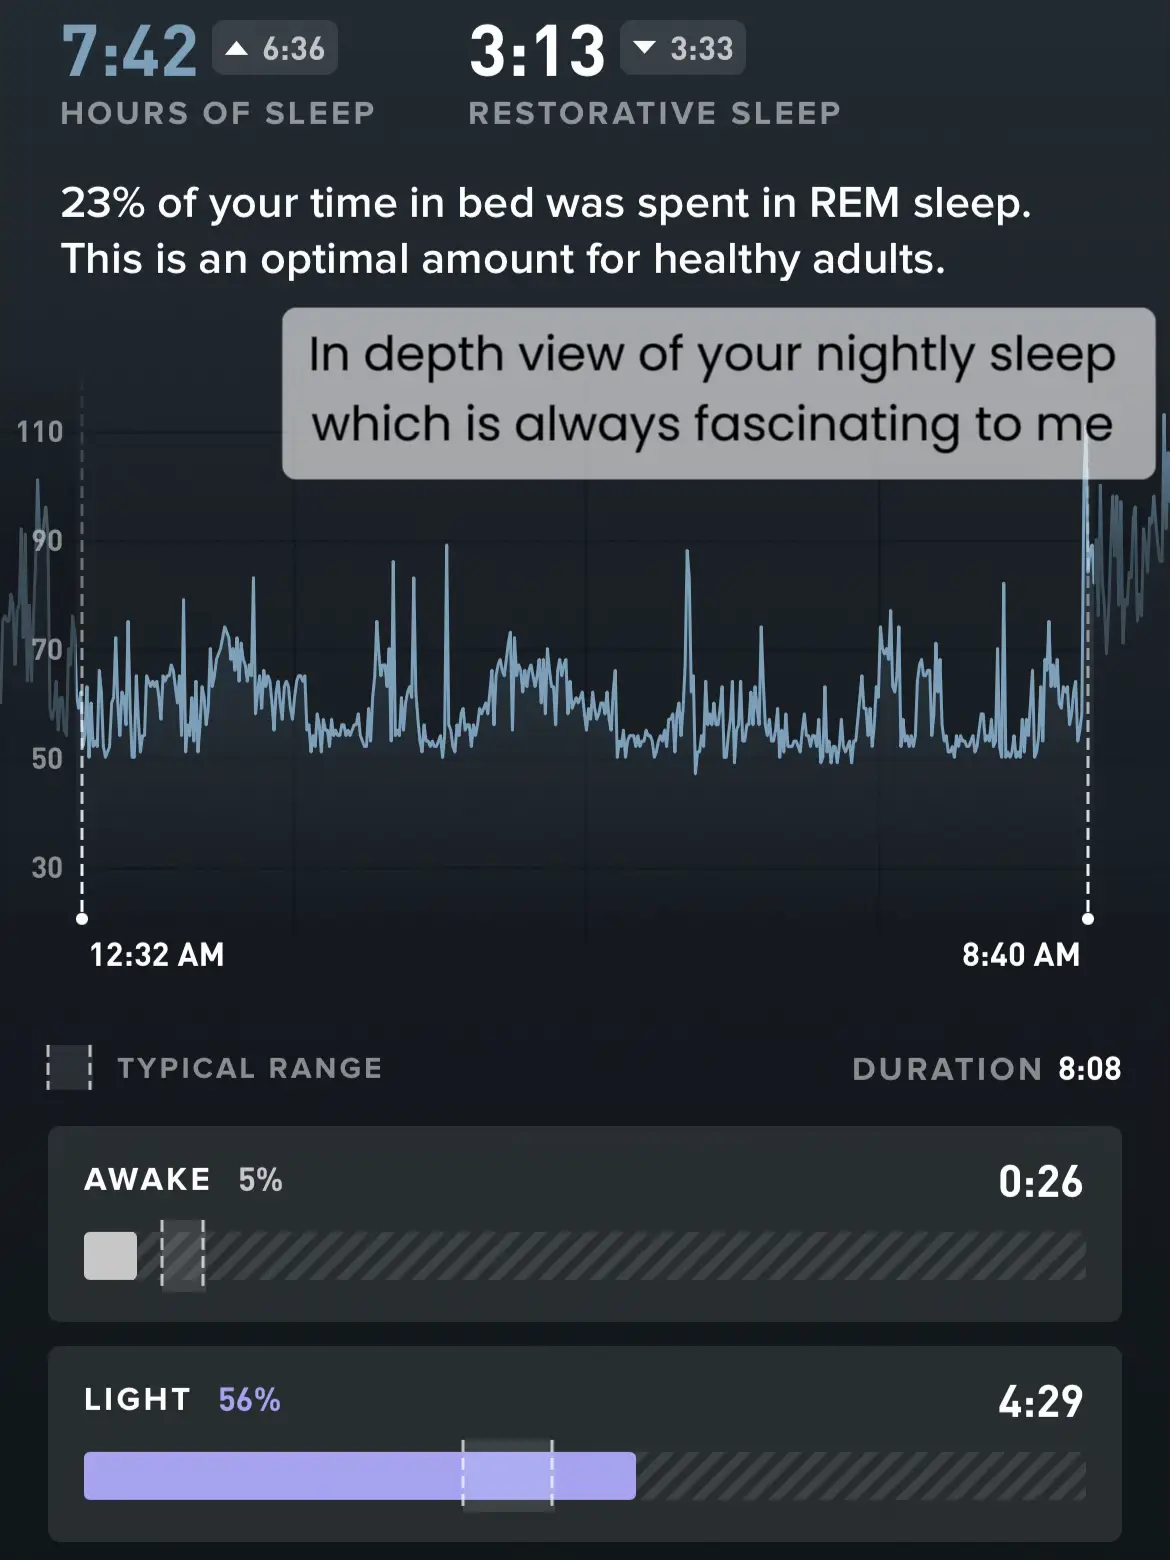  A graph showing your sleep patterns with a summary at the bottom.